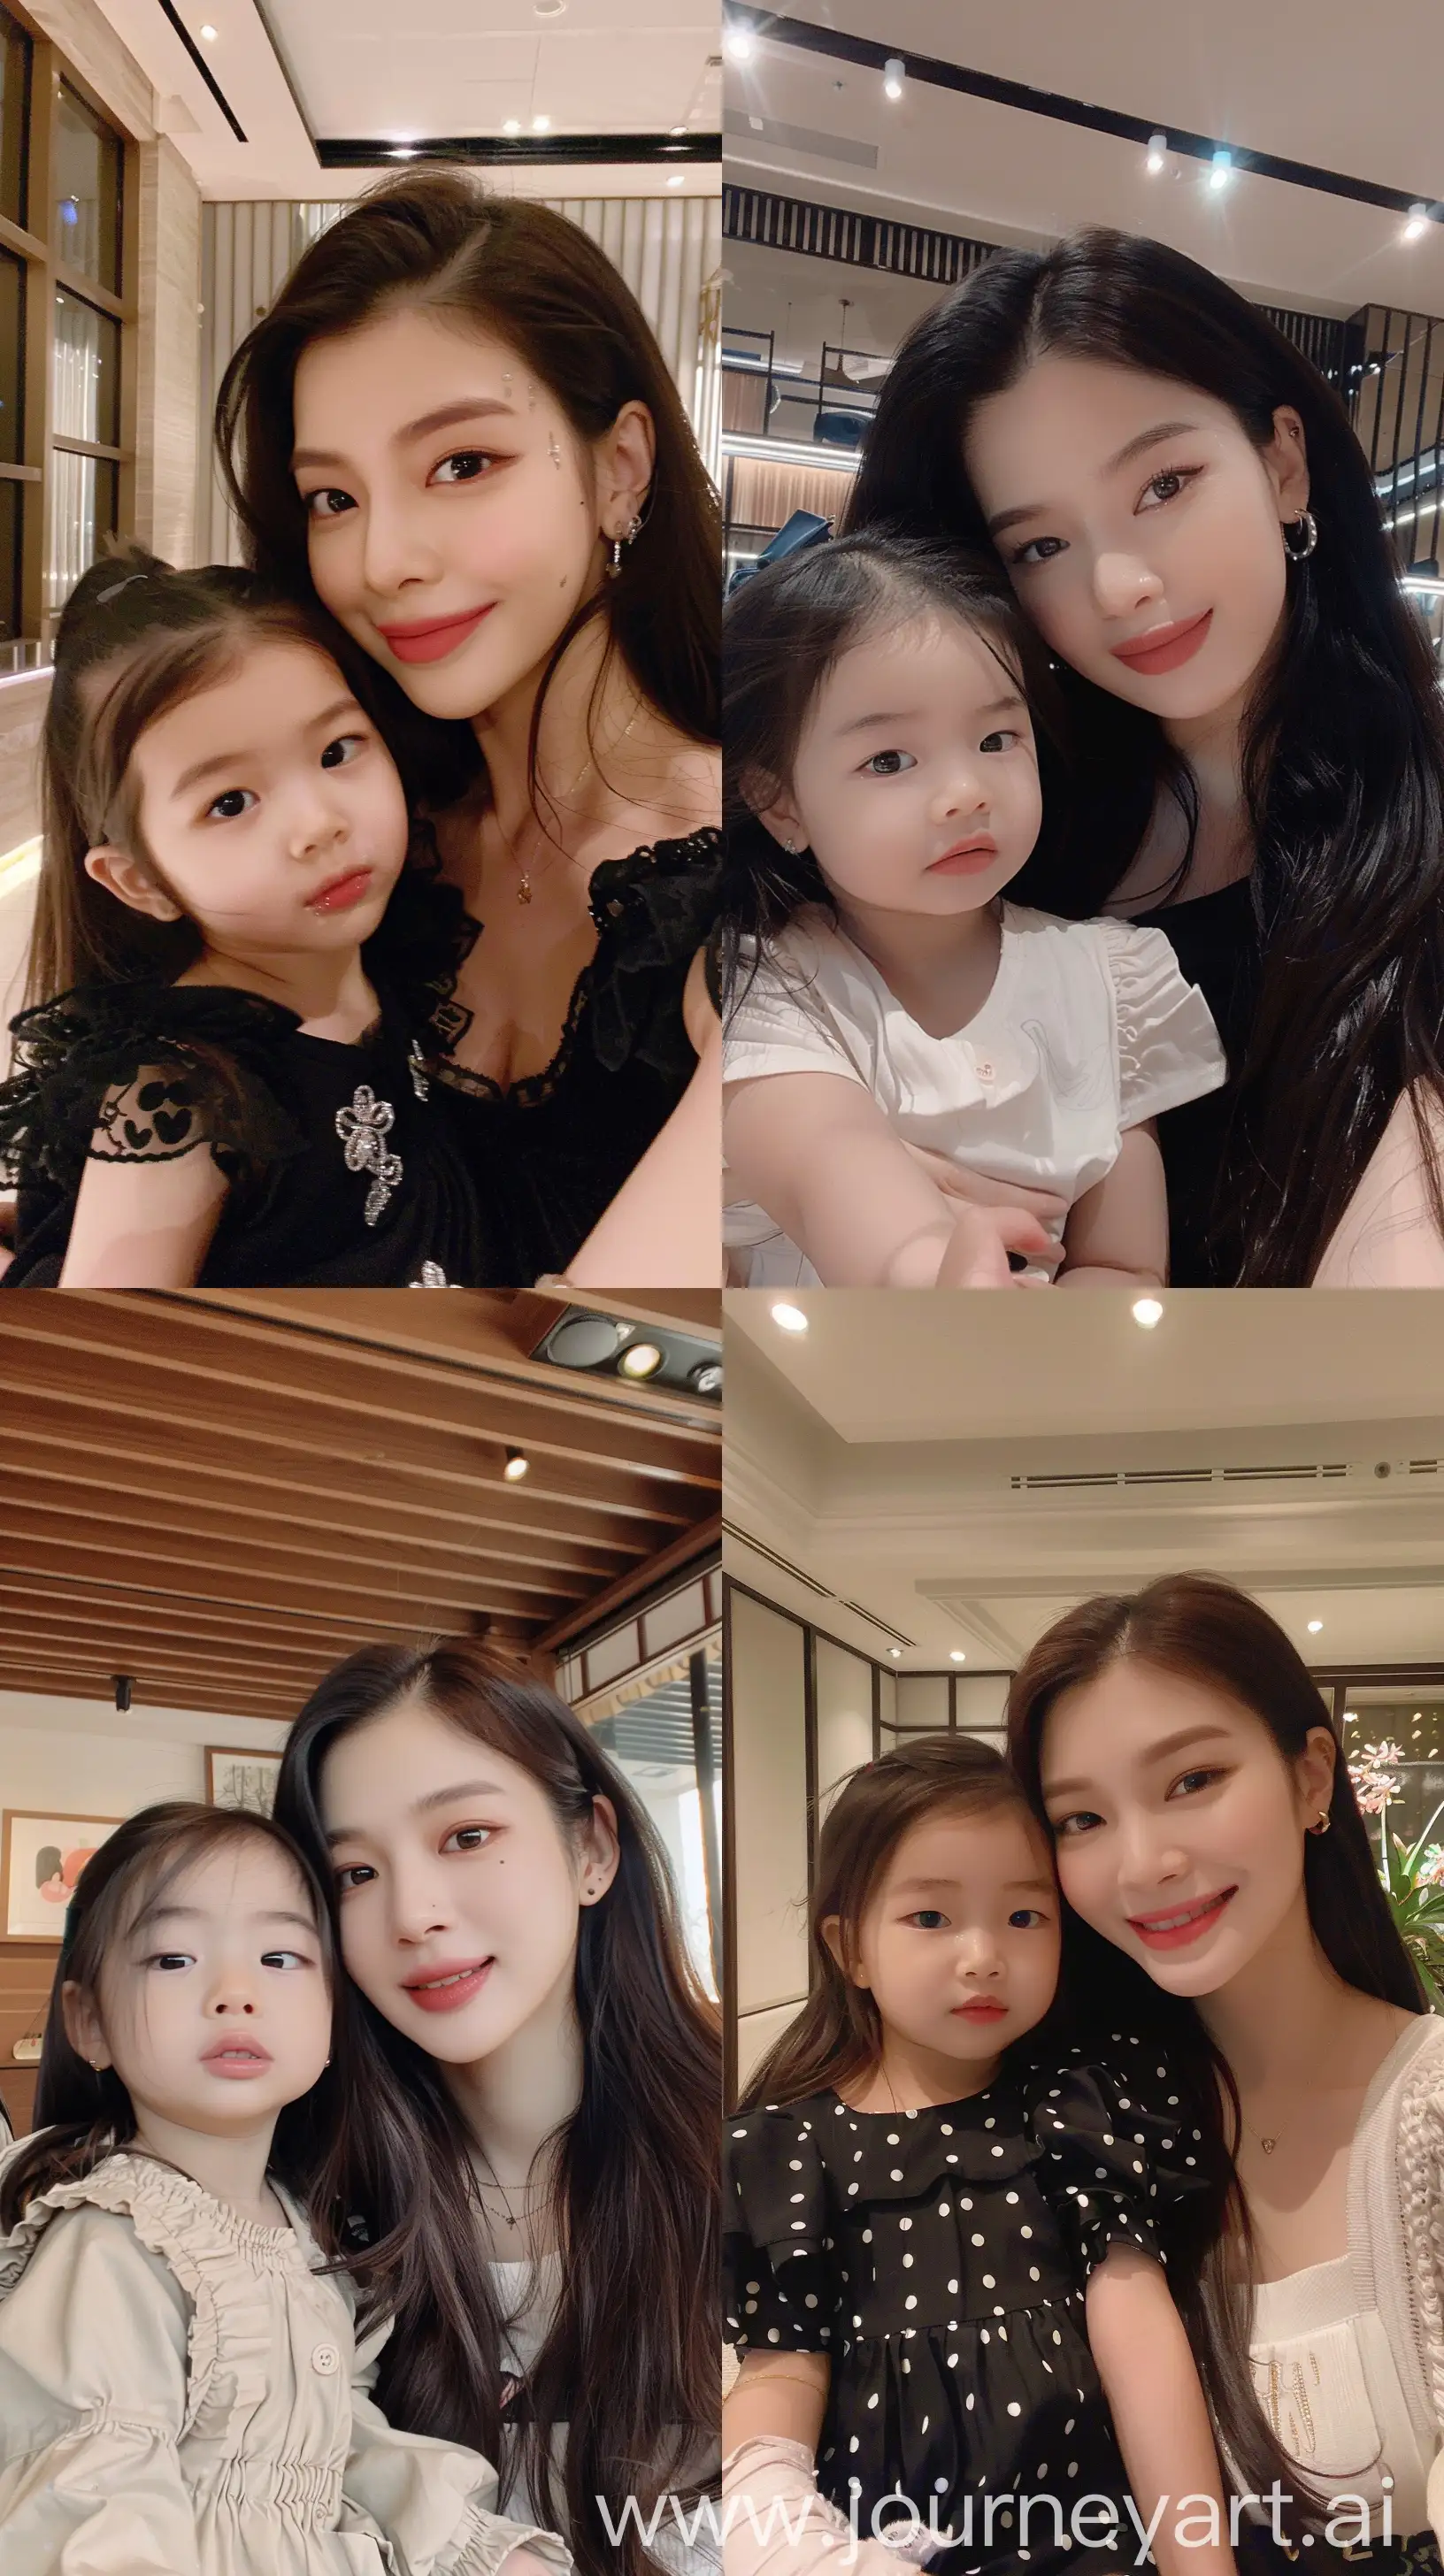 blackpink's jennie selfie with 2 years old  girl, facial feature look a like blackpink's jennie, aestethic, night times, aestethic make up,hotly elegant young mom --ar 9:16 